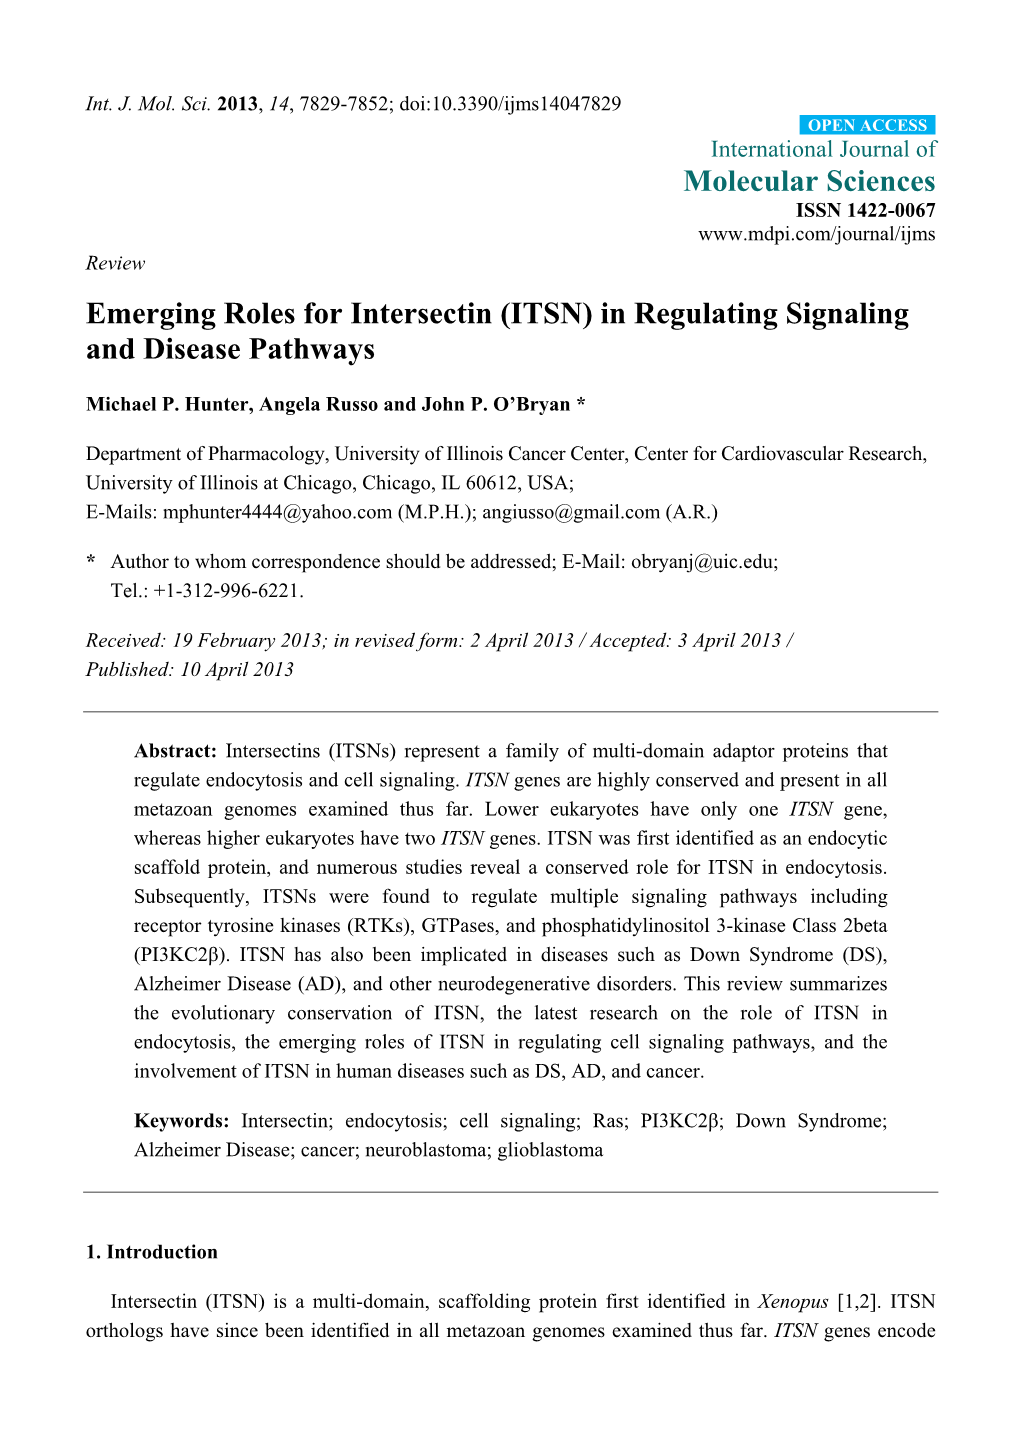 Emerging Roles for Intersectin (ITSN) in Regulating Signaling and Disease Pathways